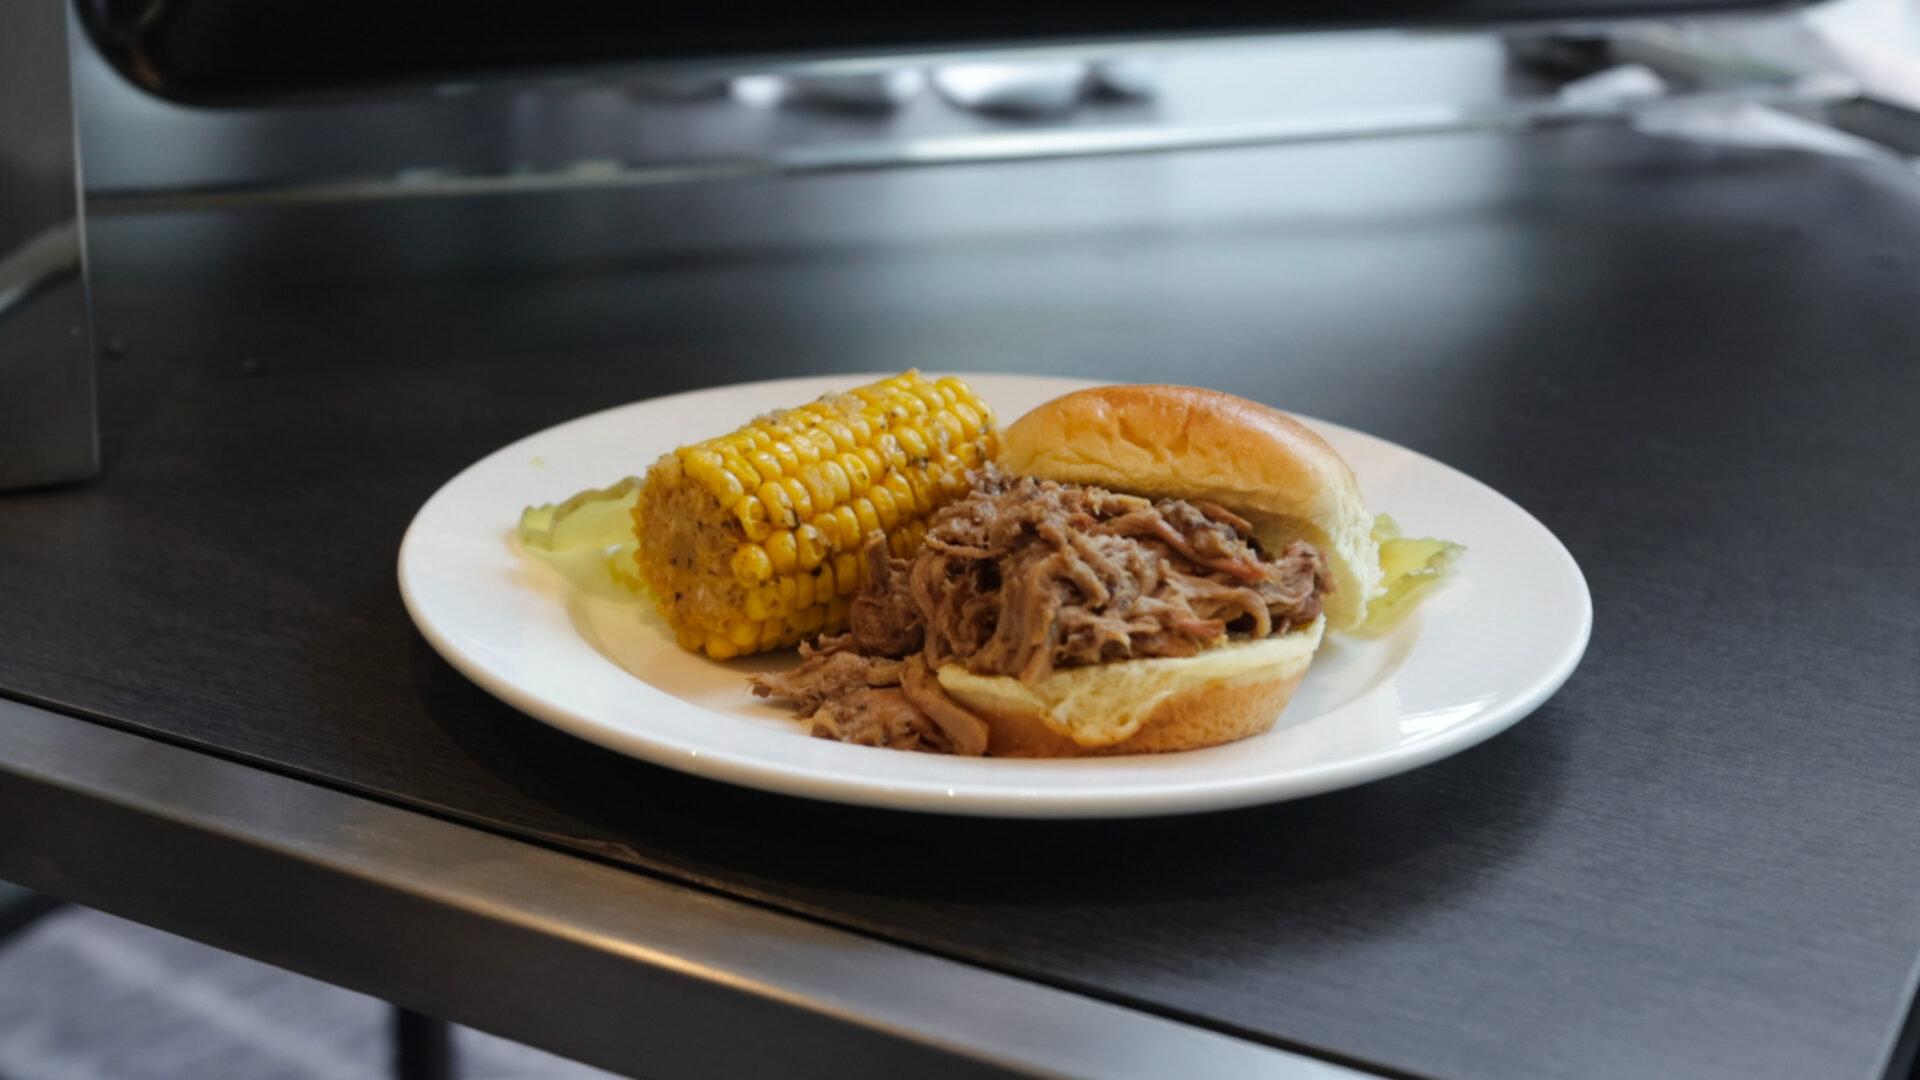 Mississippi smoke pulled pork and Cajun smoked corn by chef Michael Carr of Barbeque Shine, in Ridgeland, Mississippi.